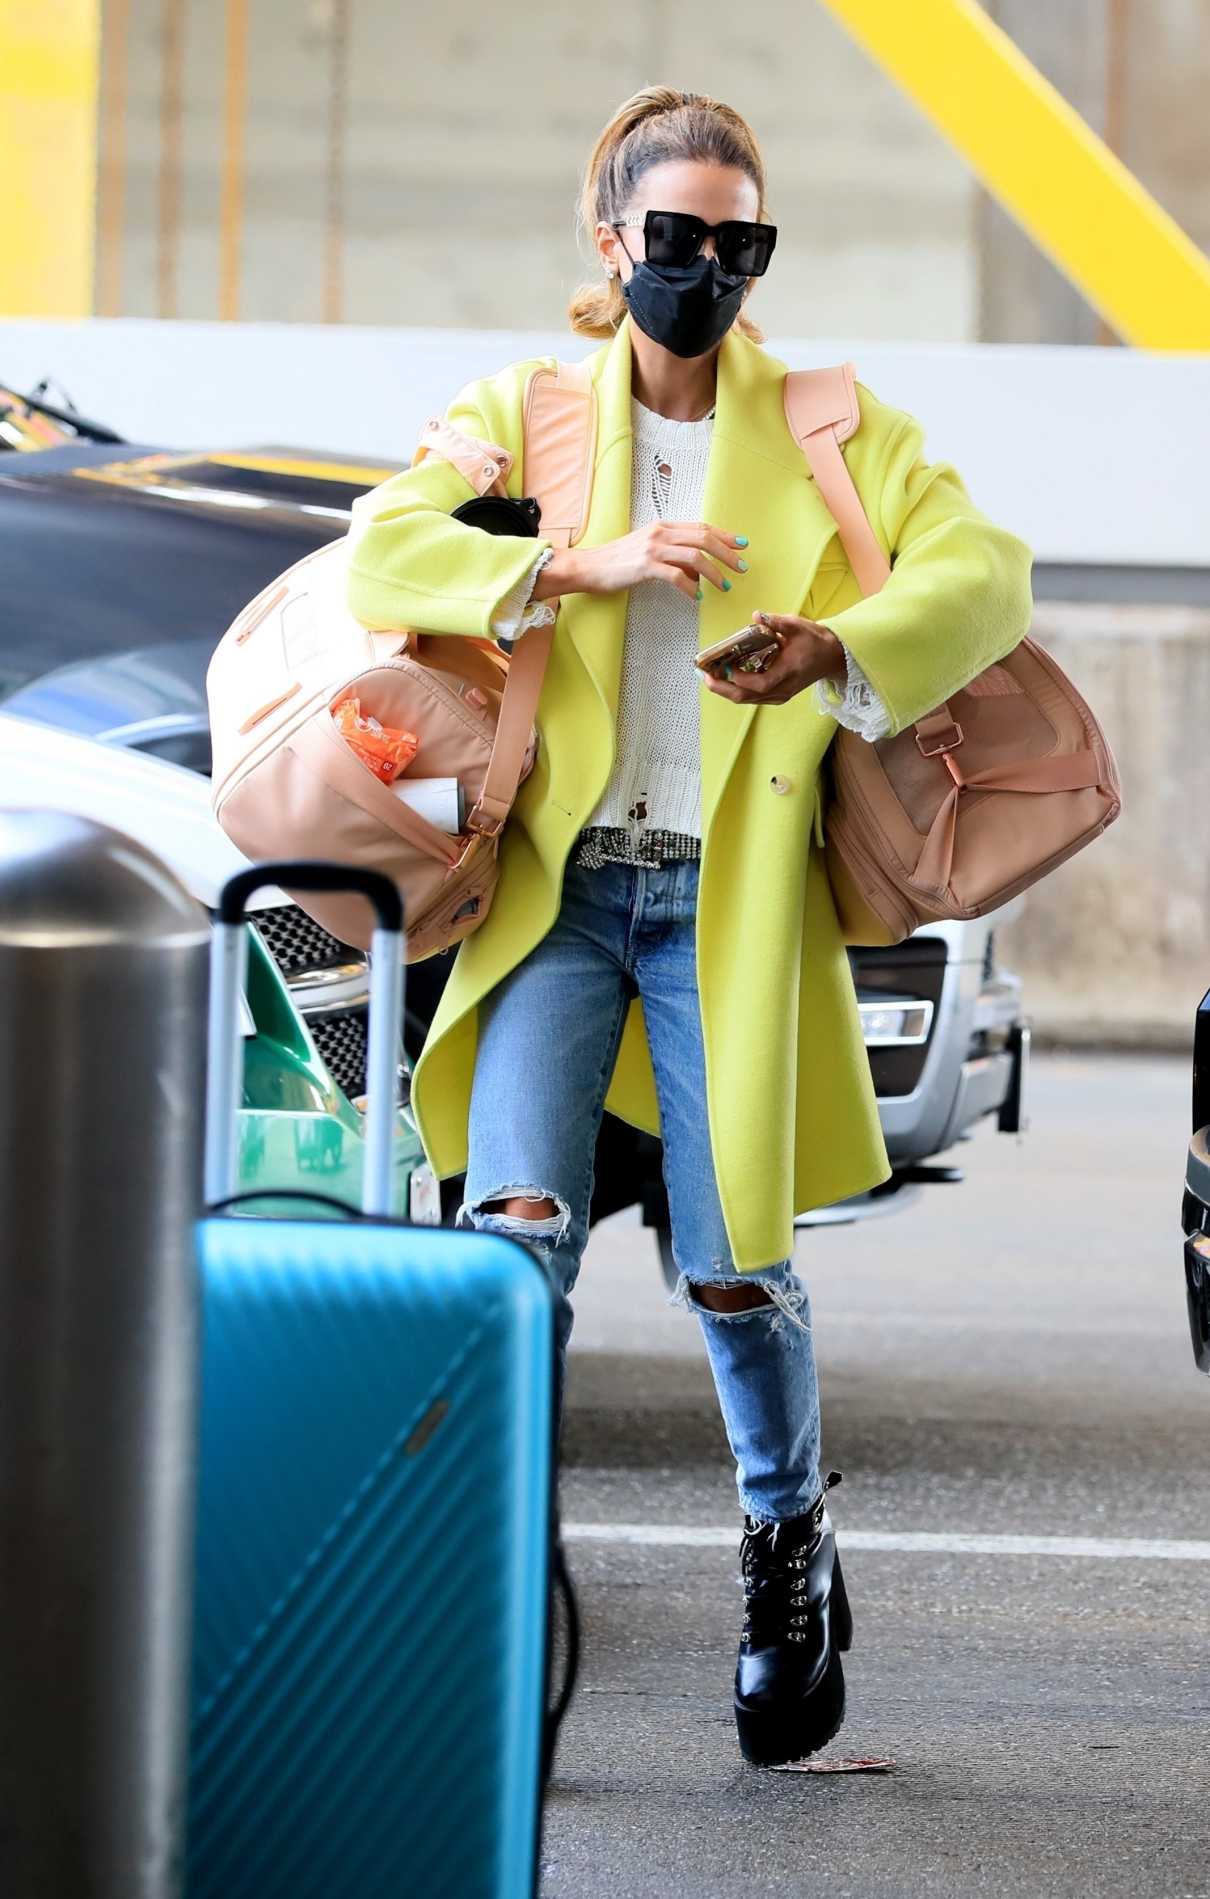 Kate Beckinsale in a Neon Yellow Coat